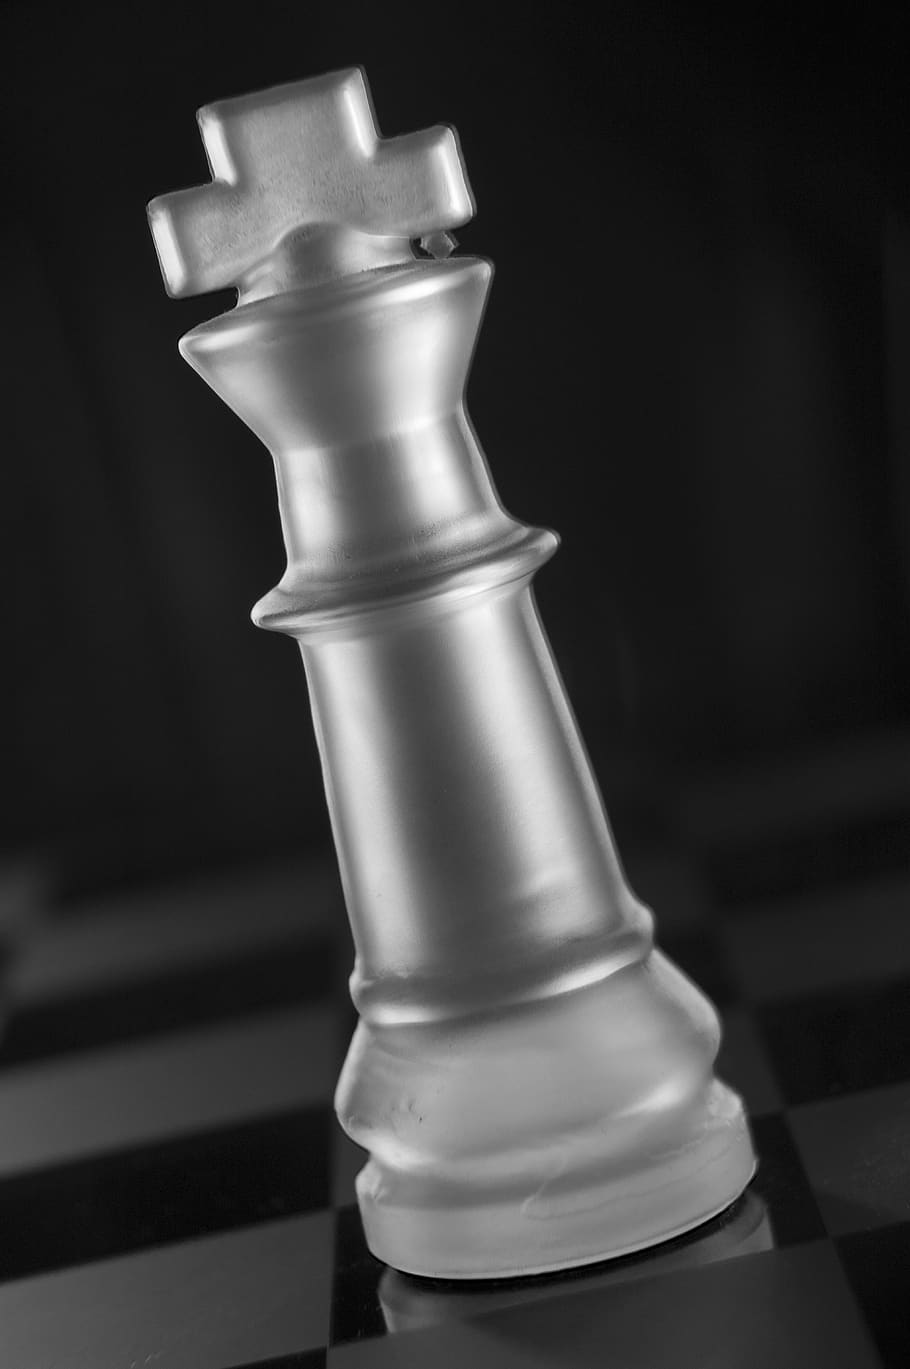 Wallpaper chess, victory, king for mobile and desktop, section